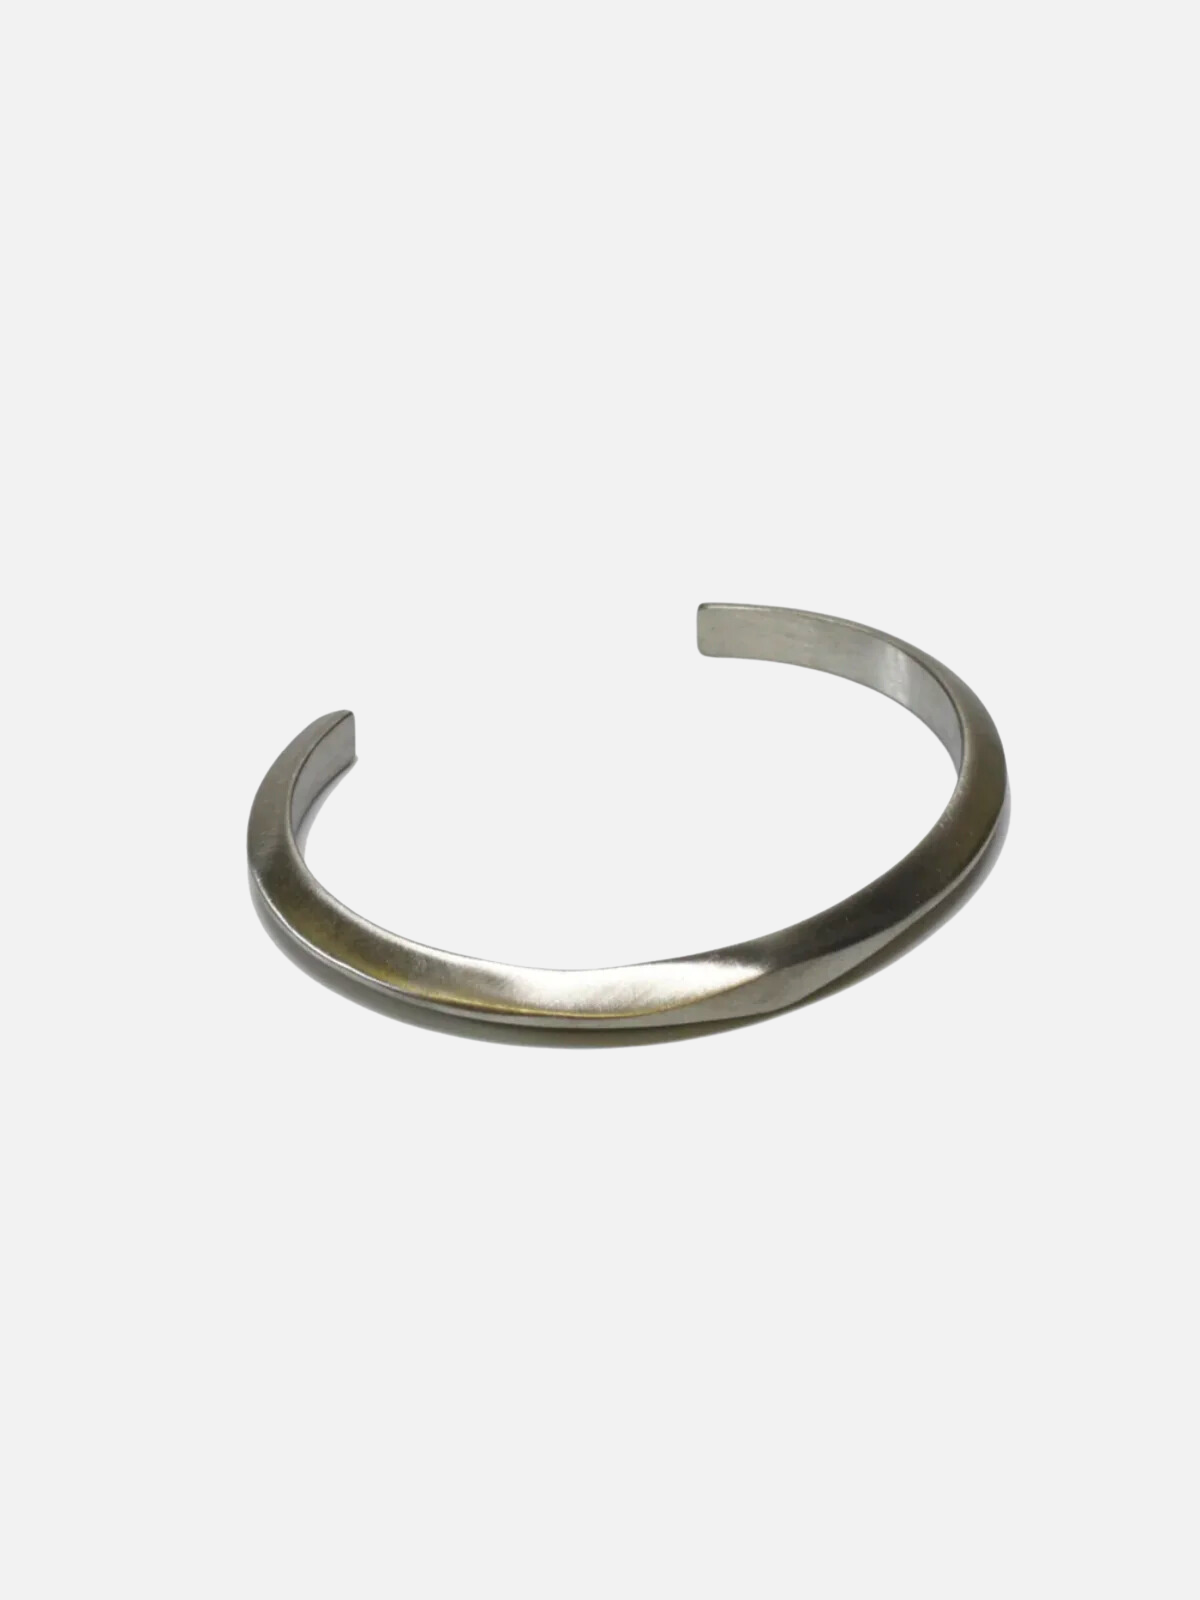 curated basics steel diamond top cuff bracelet silver jewelry gift kempt athens ga georgia men's clothing store